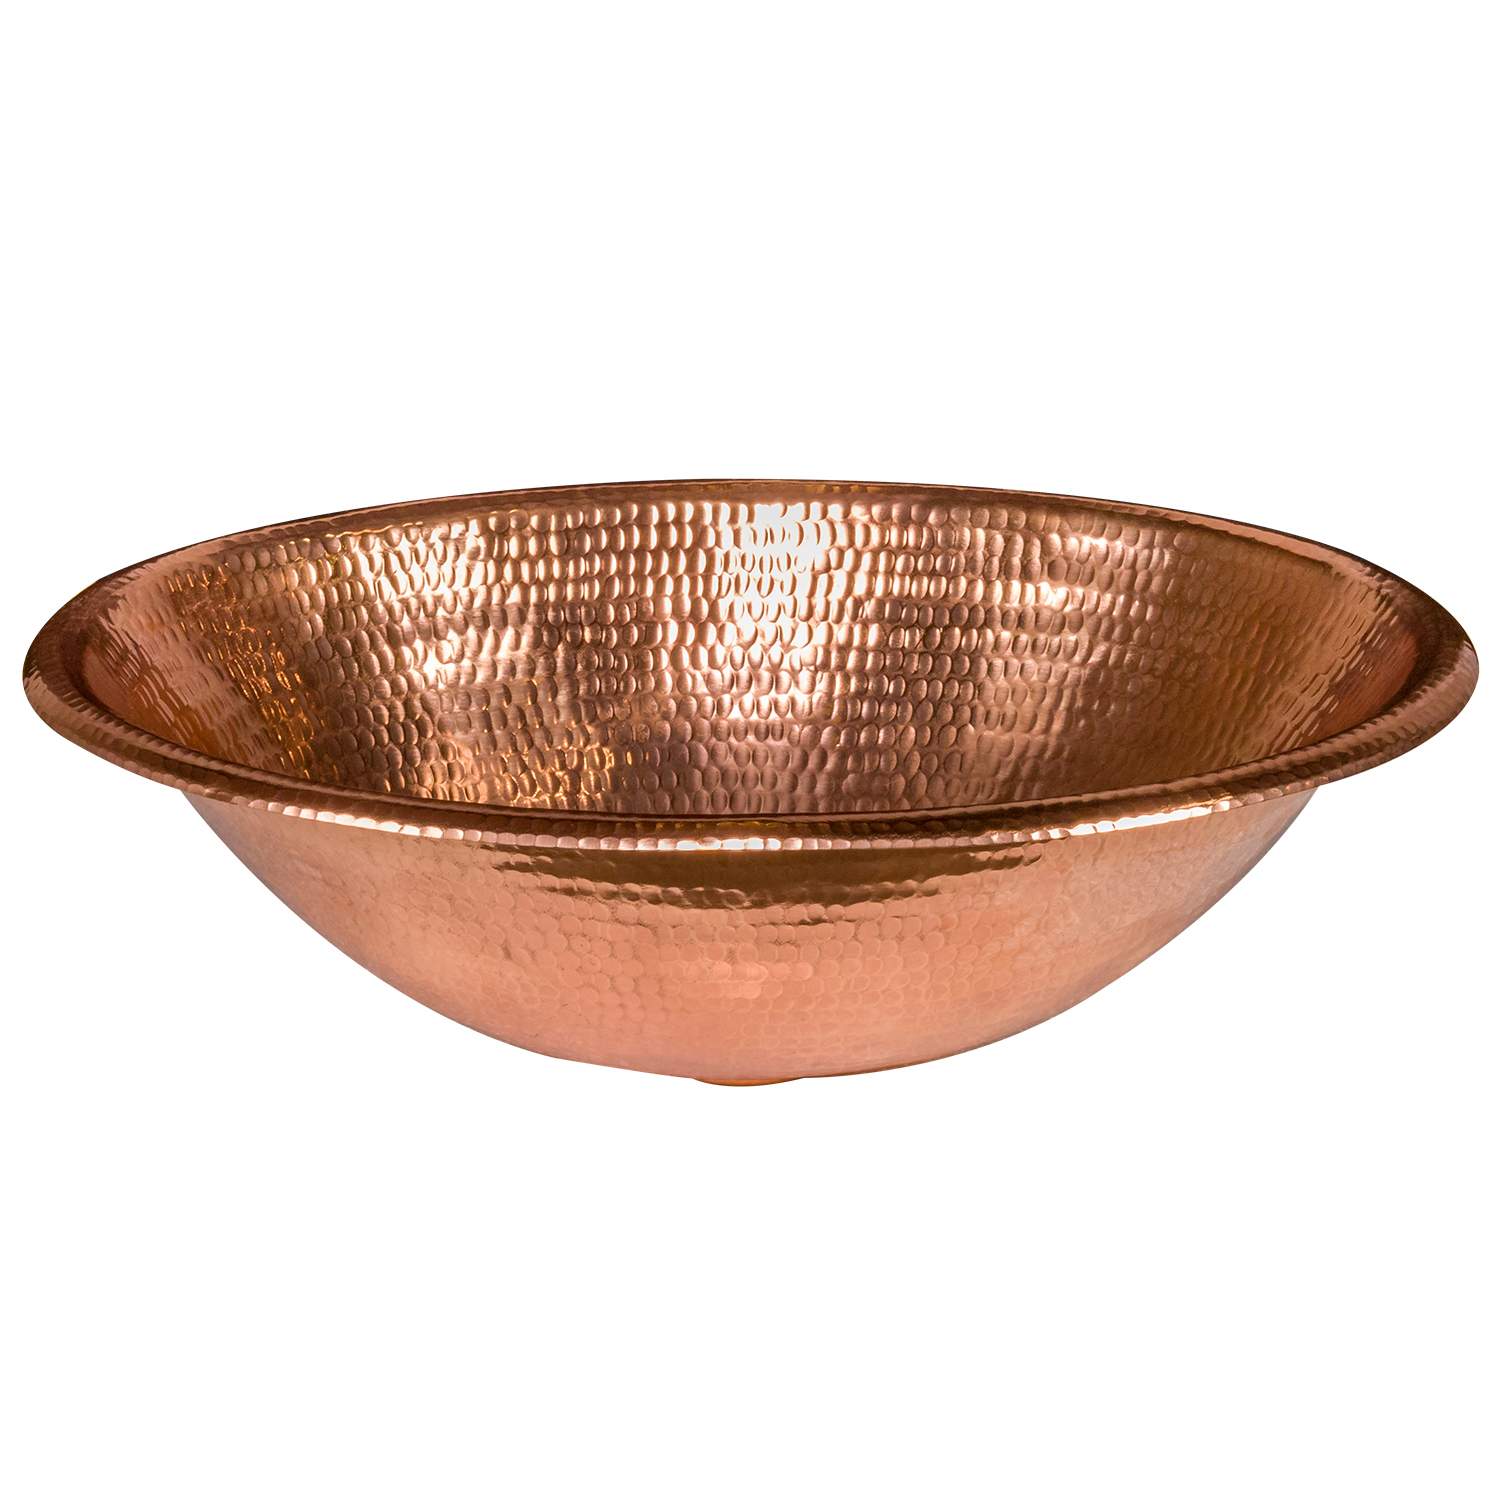 17" Oval Self Rimming Hammered Copper Bathroom Sink In Polished Copper